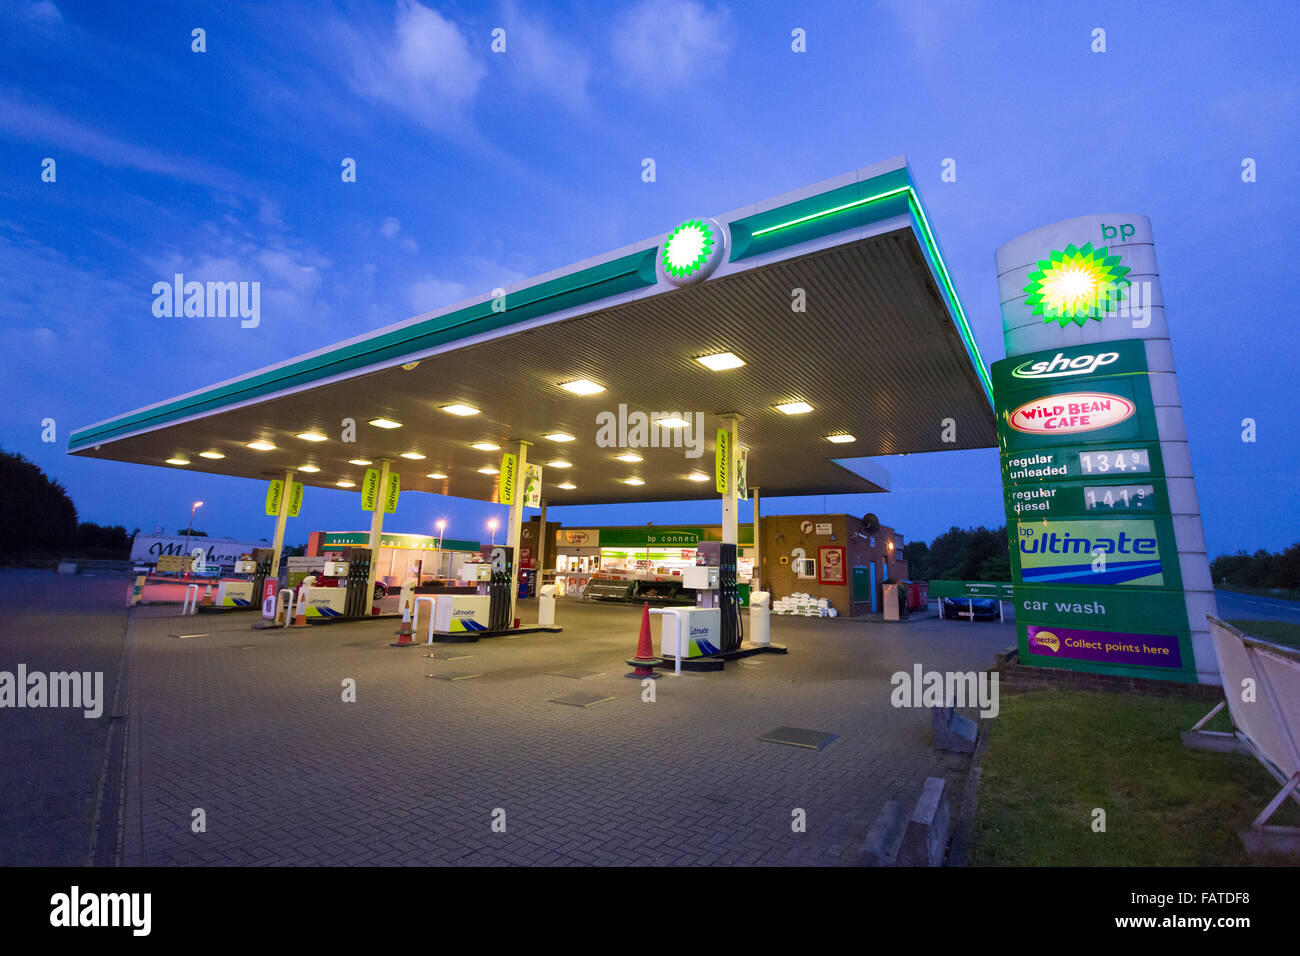 BP petrol station in the UK Stock Photo